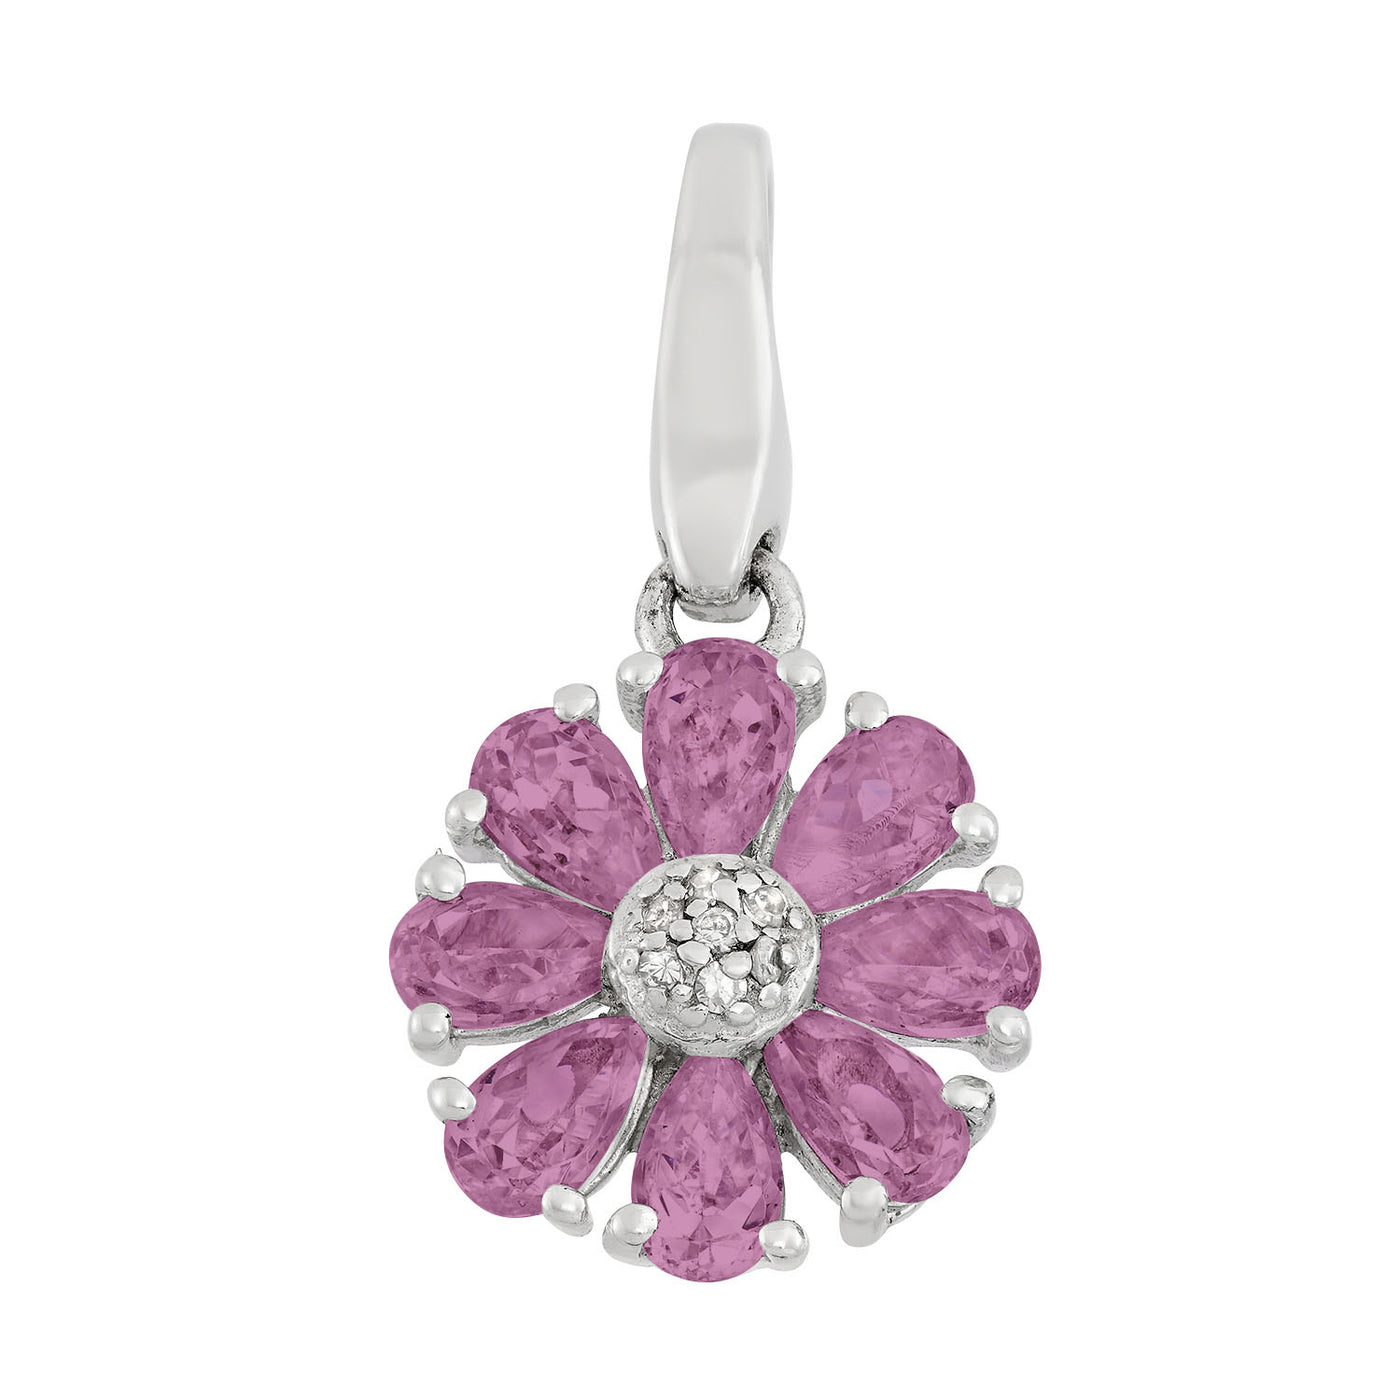 Rebecca Sloane Sterling Silver Magenta Flower With CZ Charm